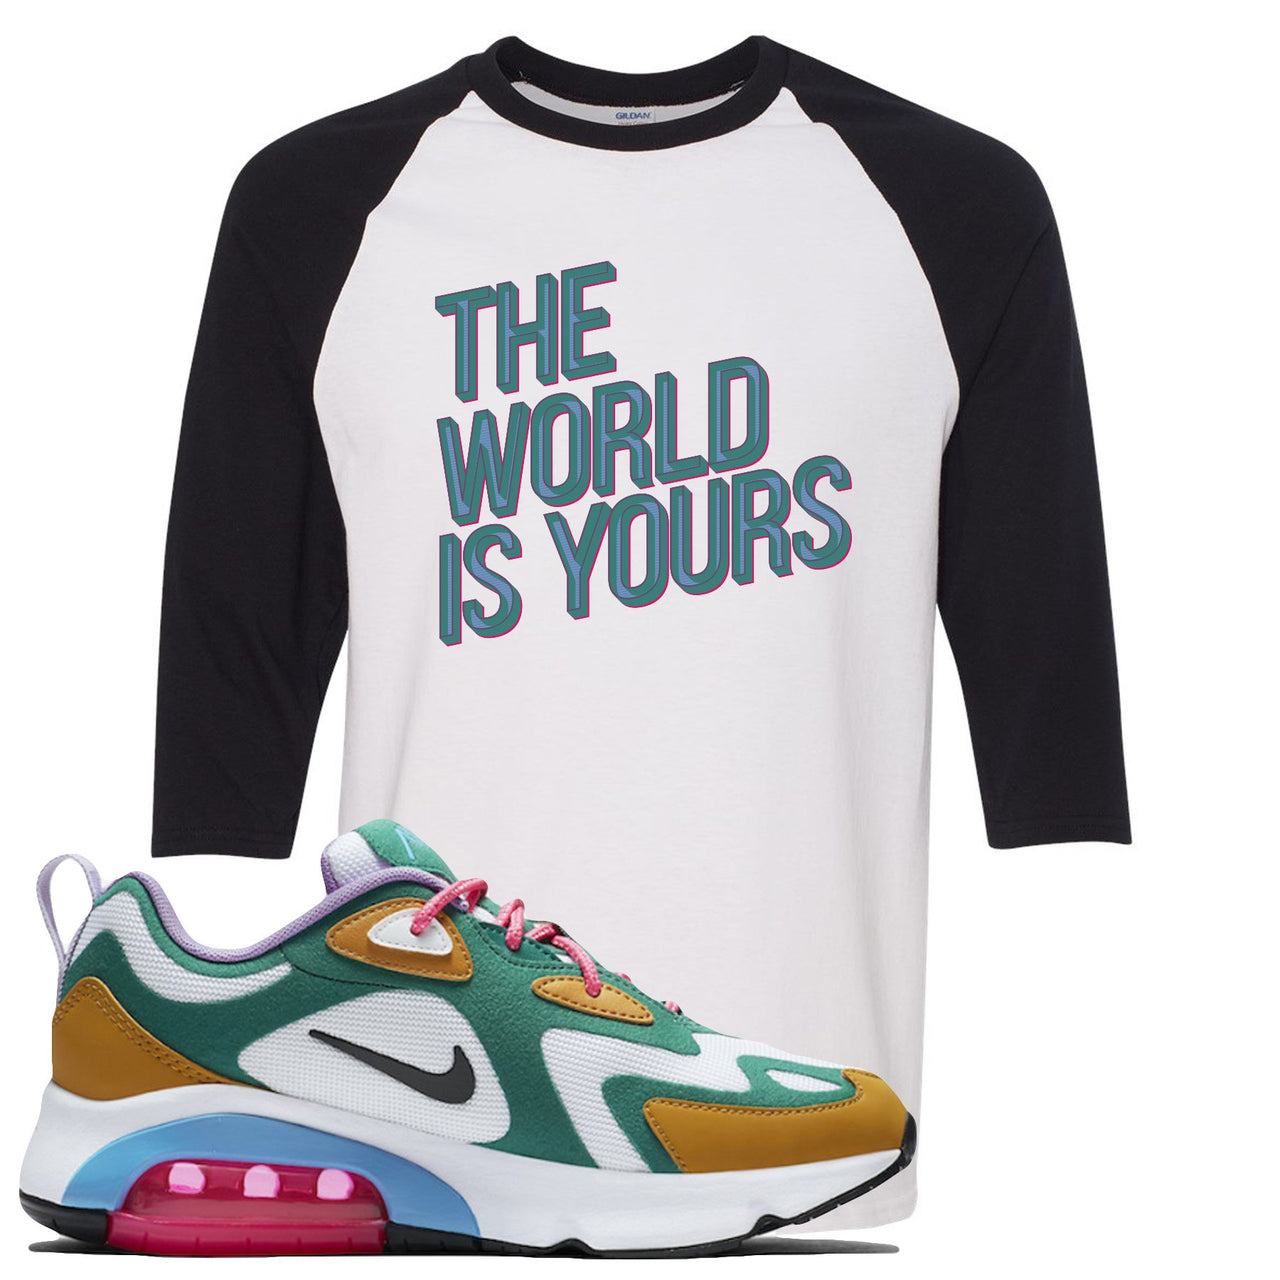 Mystic Green 200s Raglan T Shirt | The World Is Yours, White and Black